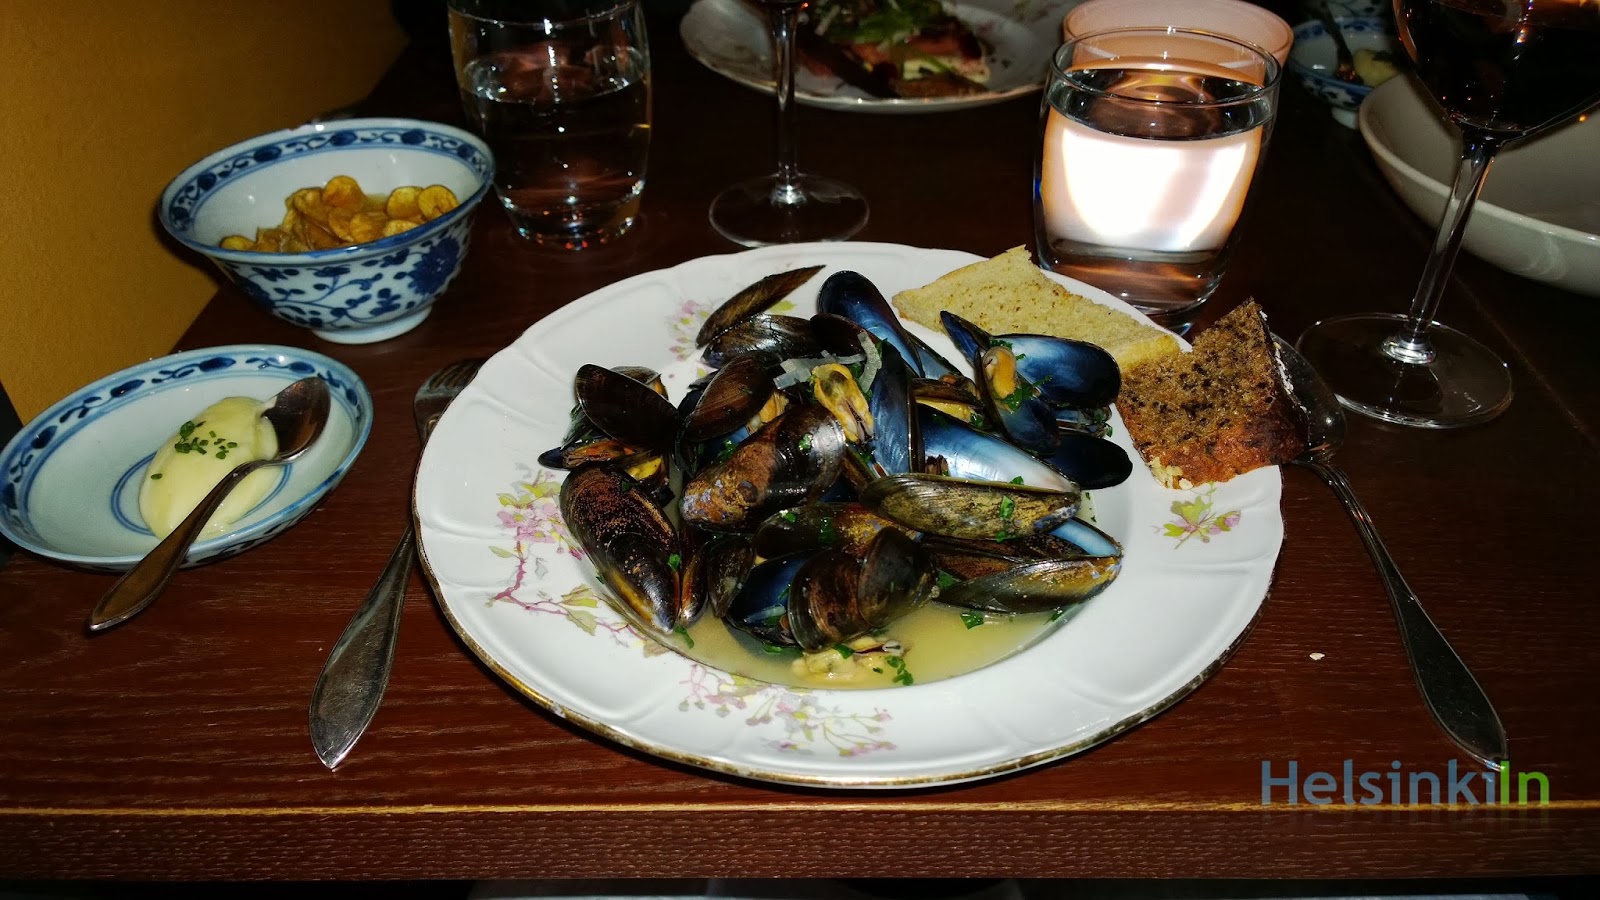 mussels with homemade potato chips at Ravintola Kolo